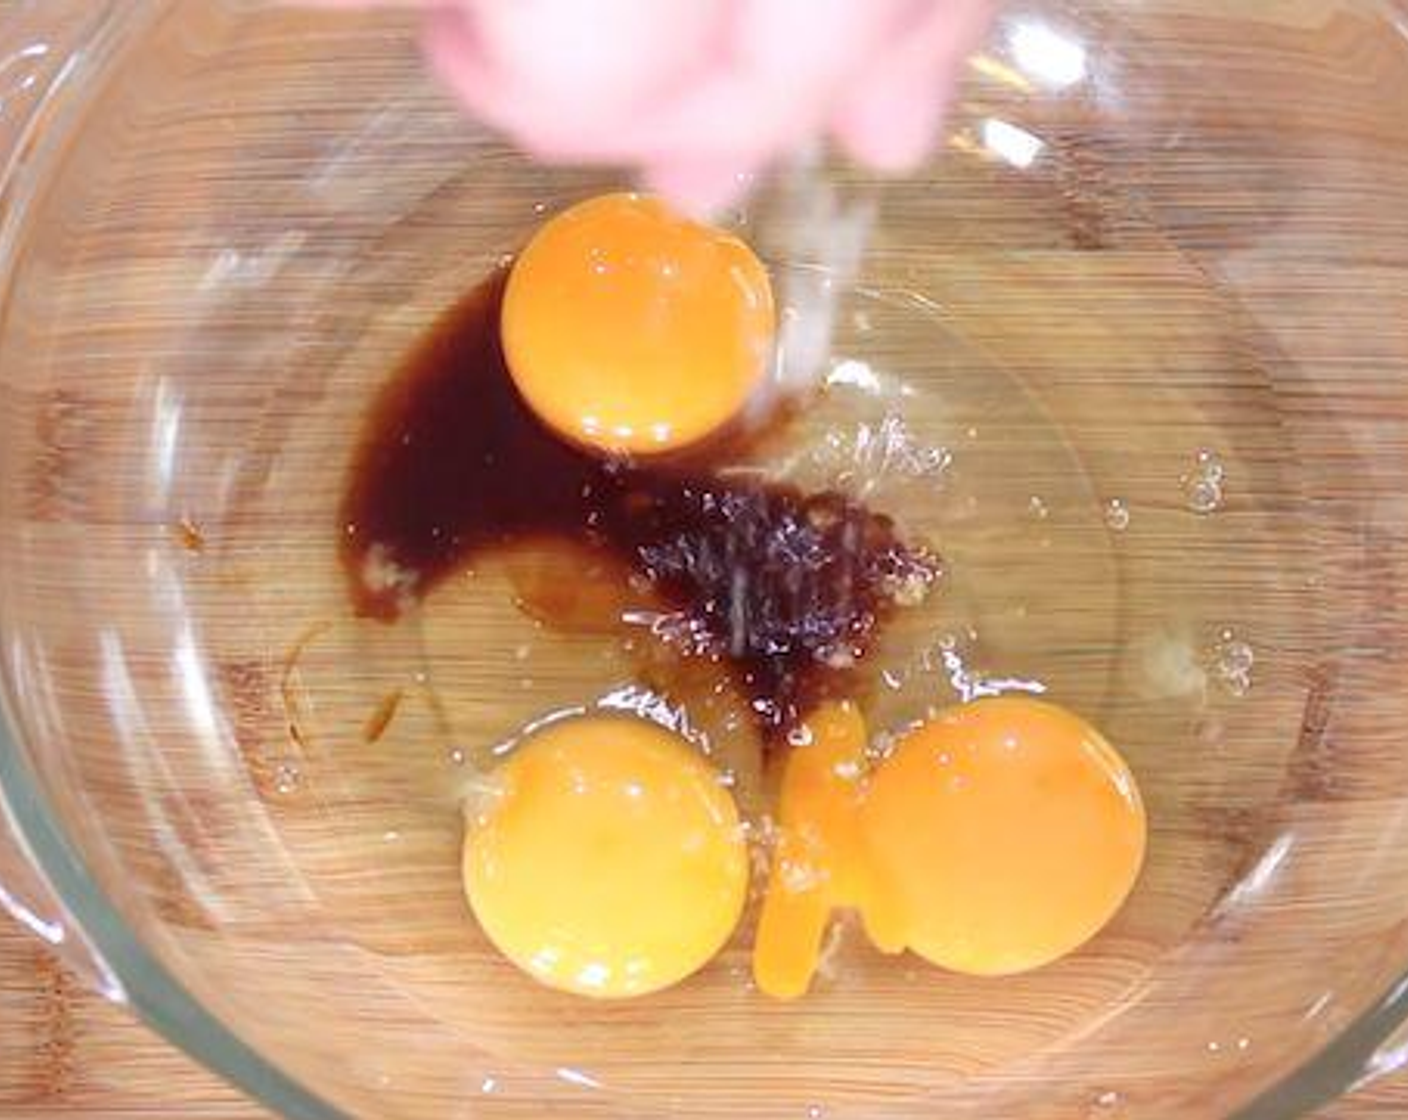 step 1 Combine Eggs (4), Sake (1 tsp), Soy Sauce (1/2 tsp), Salt (1/4 tsp) and Ground Black Pepper (1/4 tsp) in the medium bowl and mix but do not over mix.